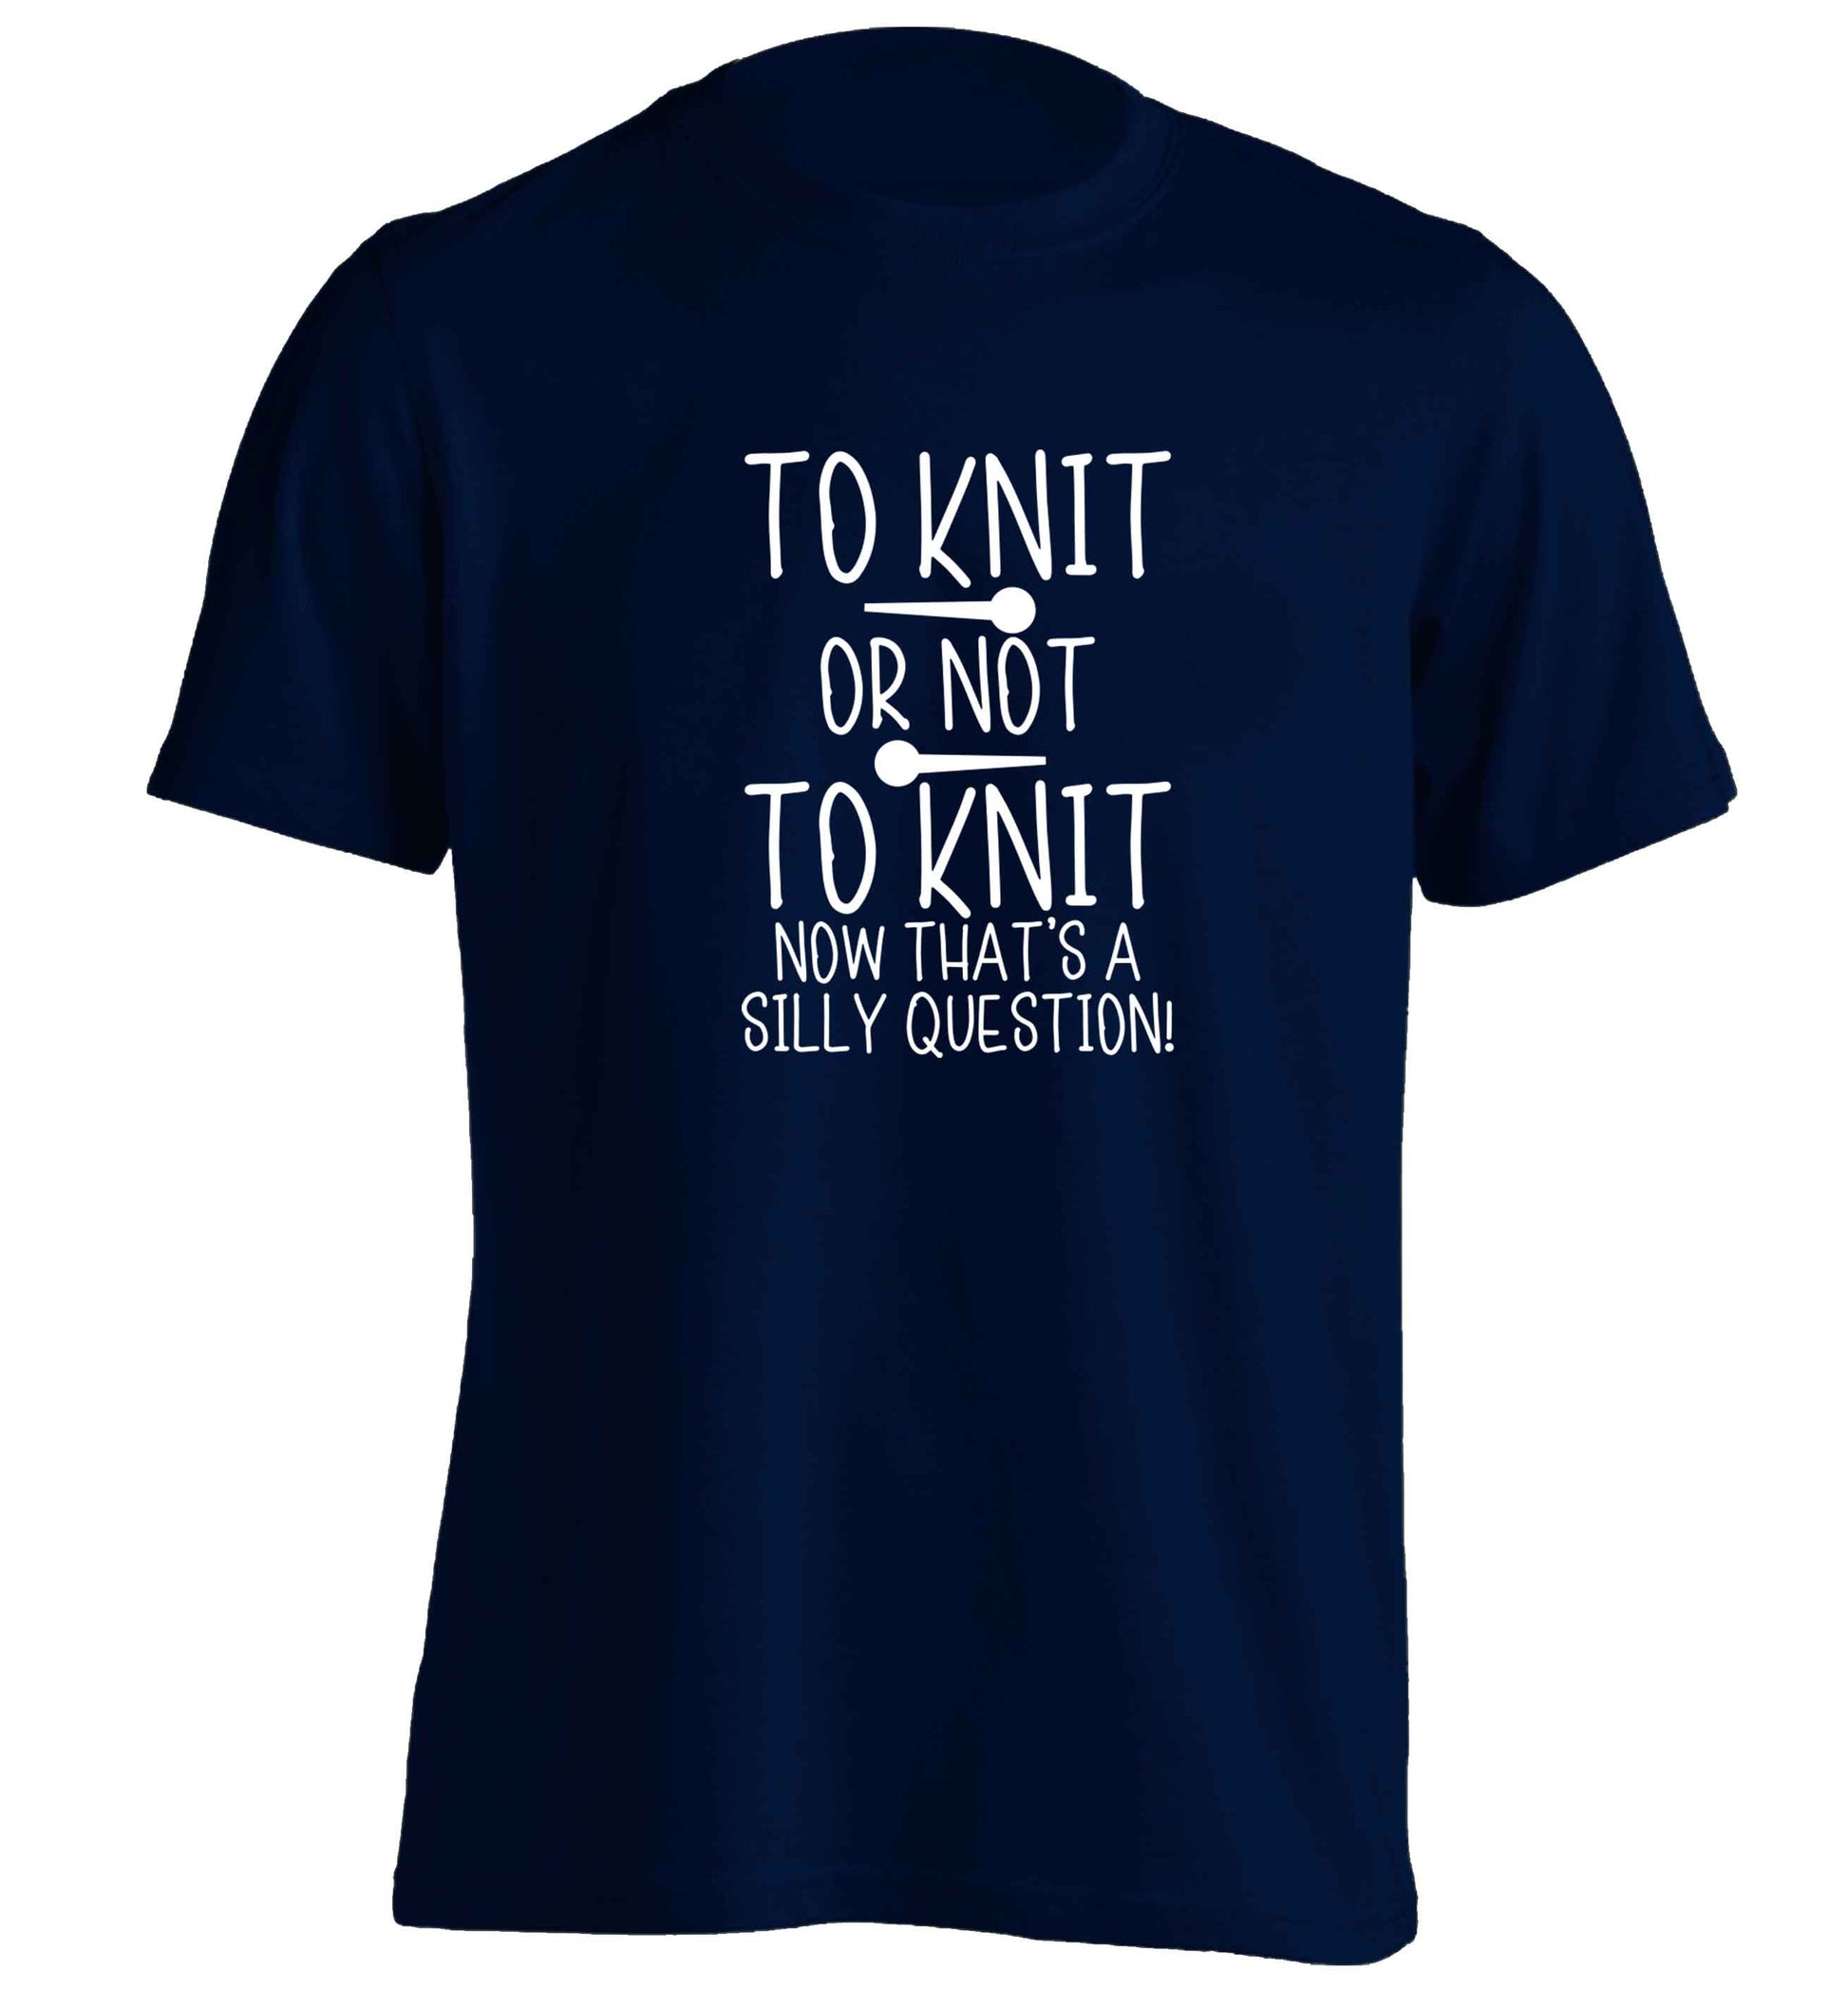 To knit or not to knit now that's a silly question adults unisex navy Tshirt 2XL